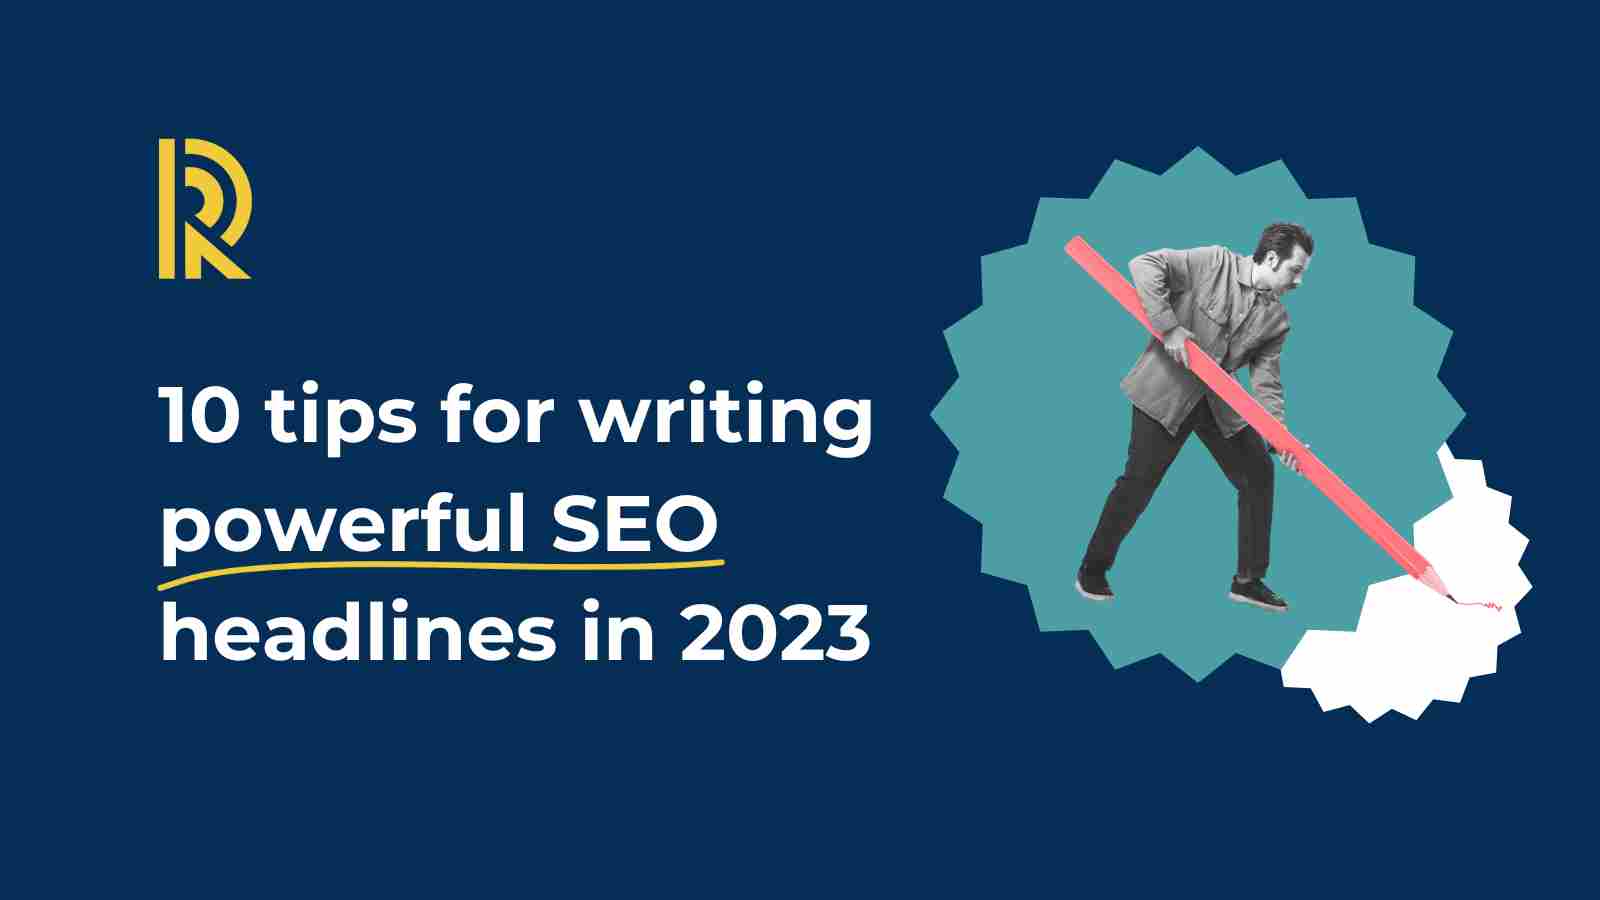 10 tips for writing powerful SEO headlines in 2023